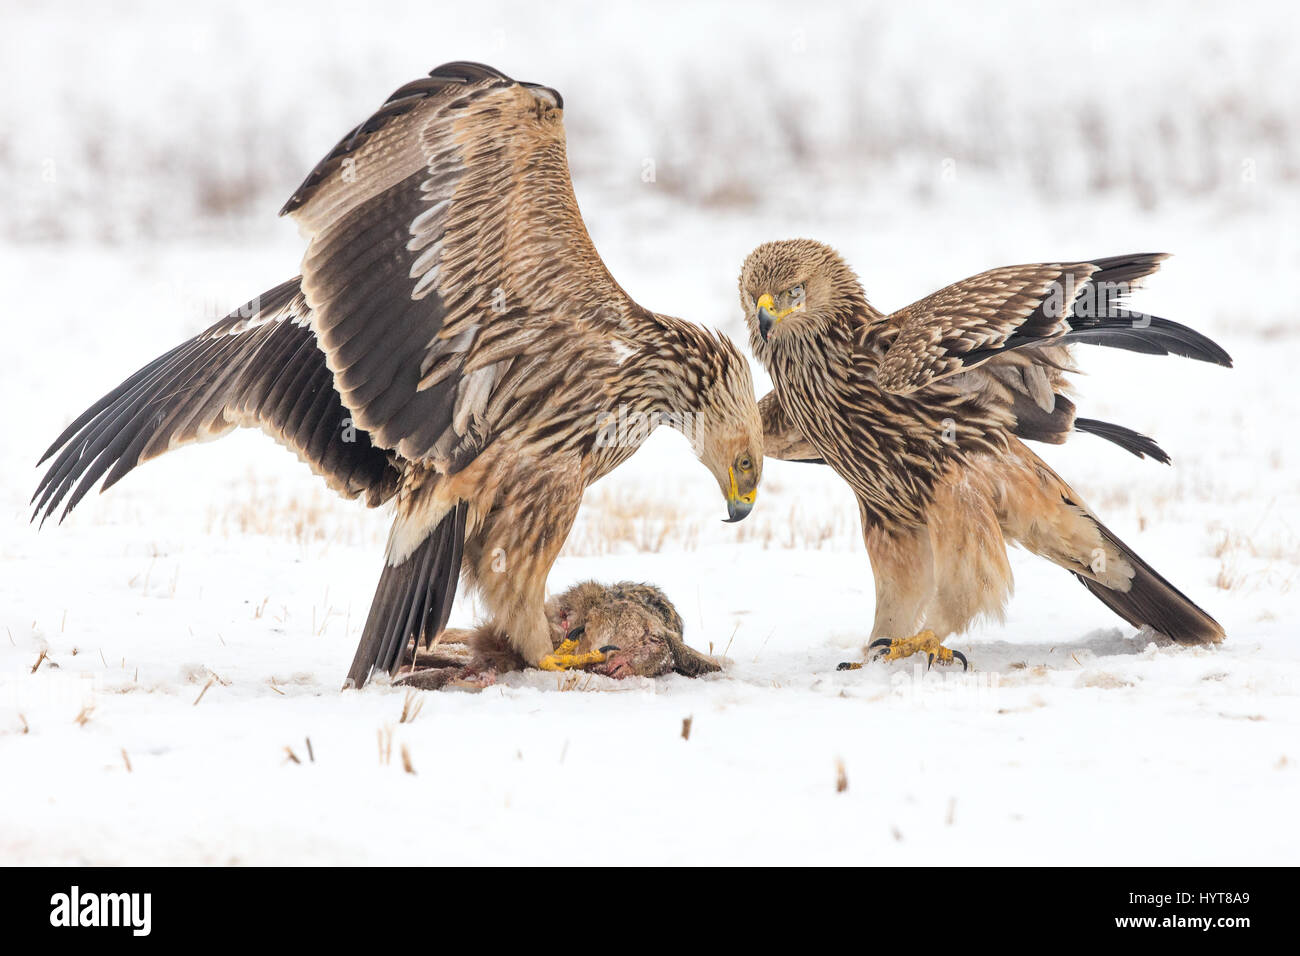 Two juvenile Eastern Imperial Eagles (Aquila heliaca) standing over a dead Hare in snow Stock Photo